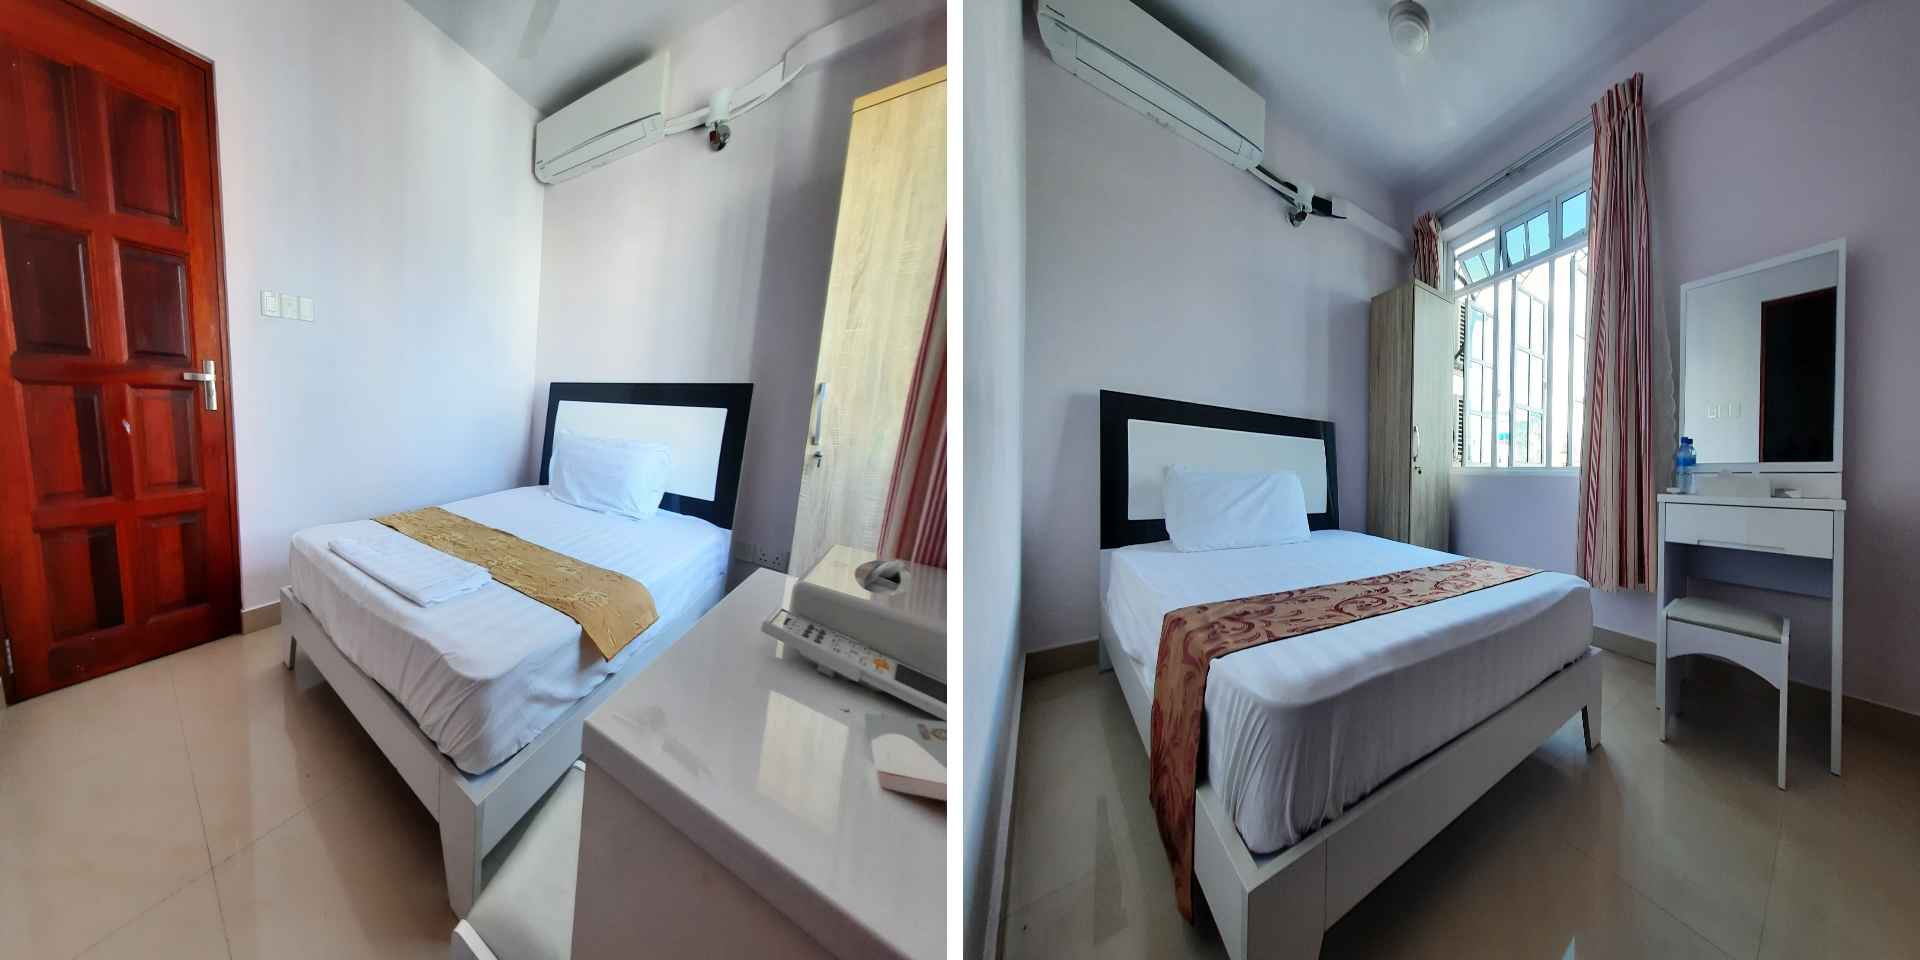 Our budget single room - ideal for low cost short stays or for an over-night.